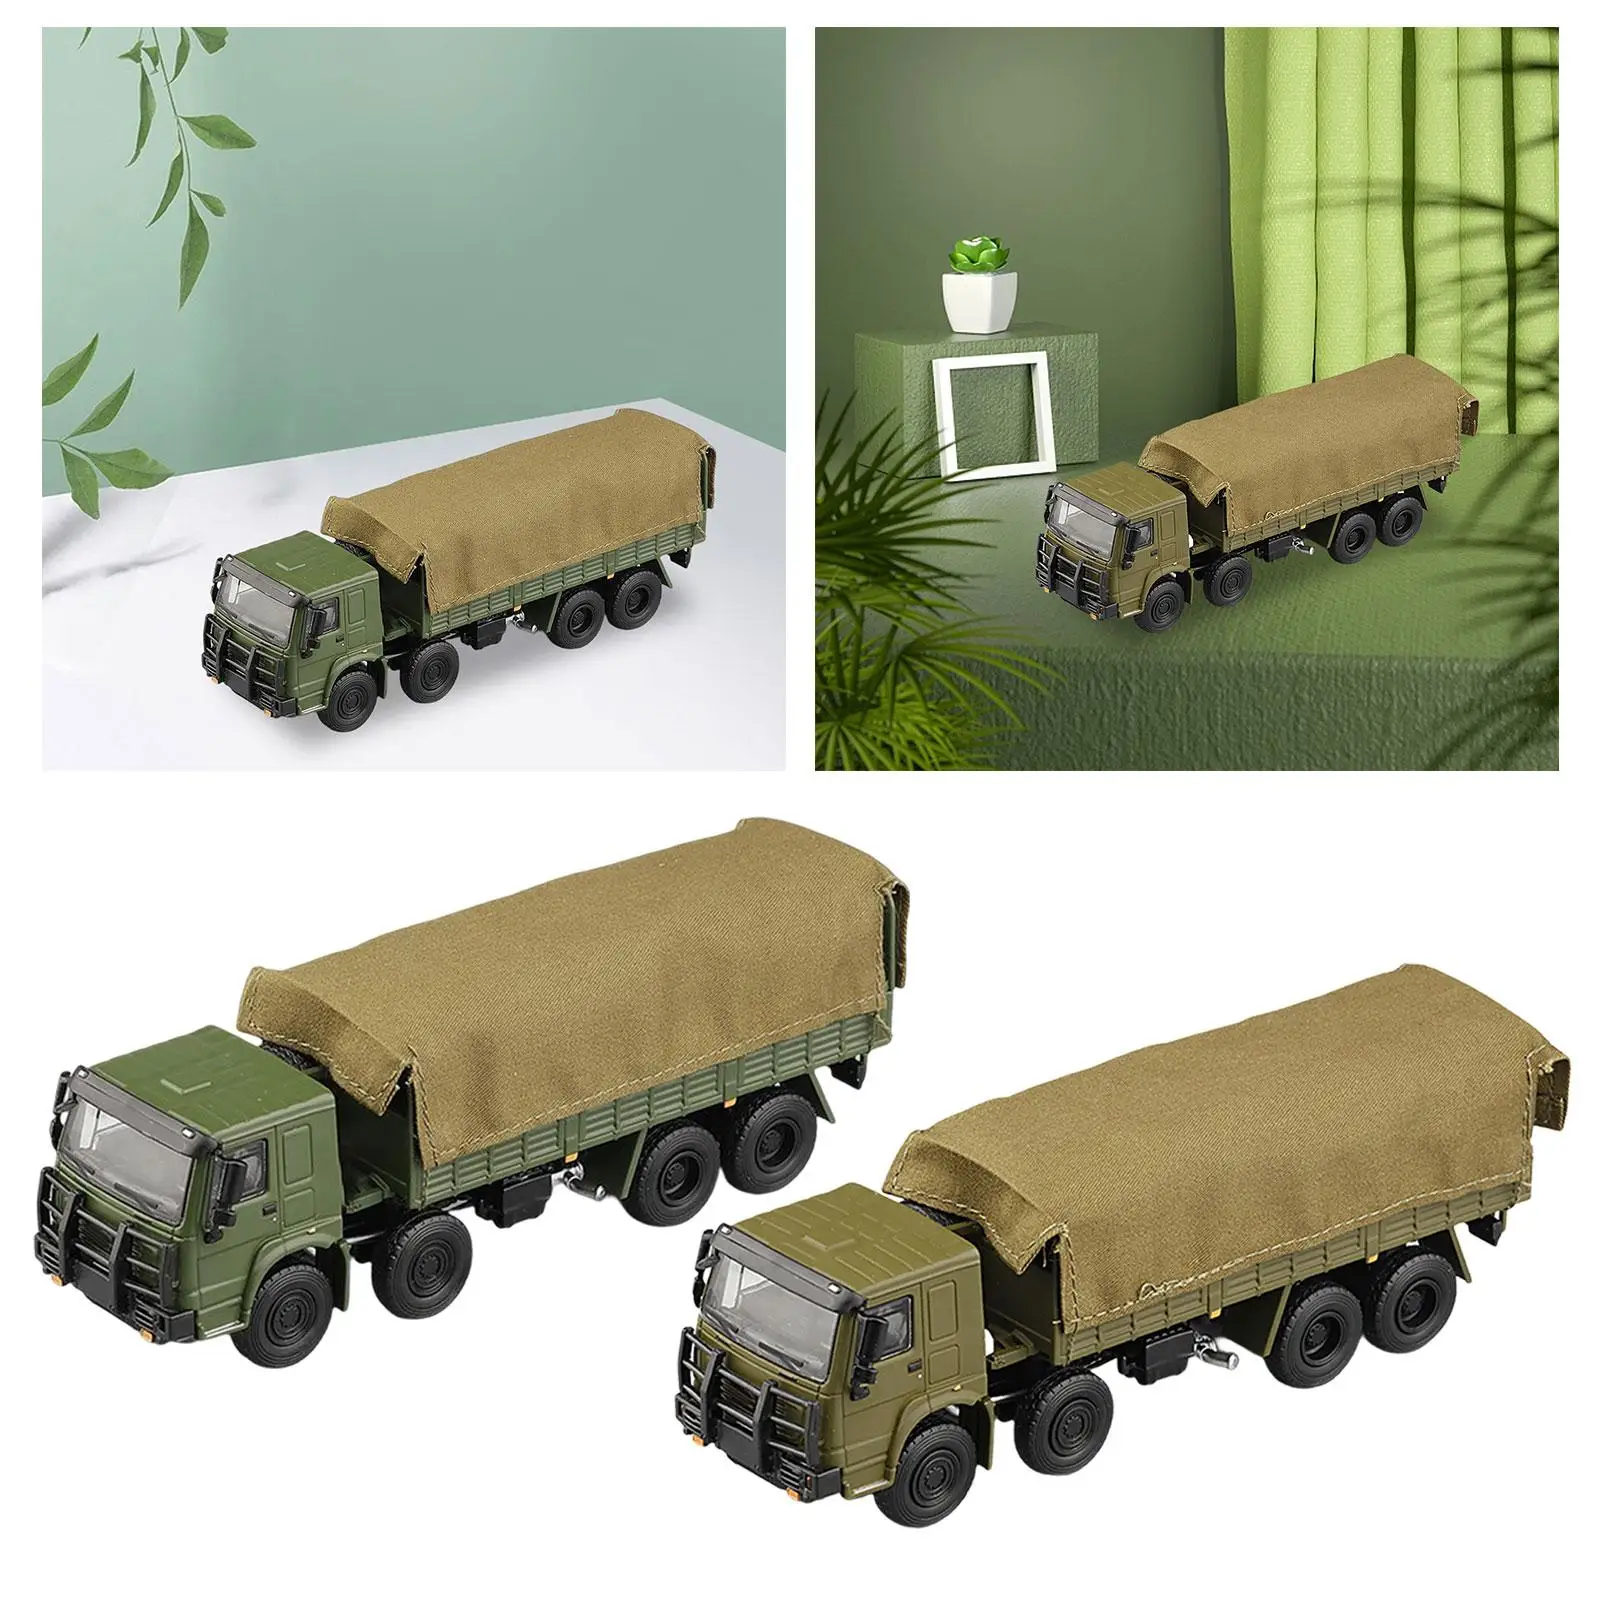 1/64 Diecast Model Car Truck Adults Gifts Diorama Scenes Sand Table Ornament Collection for Diorama Miniature Scene Decor Layout